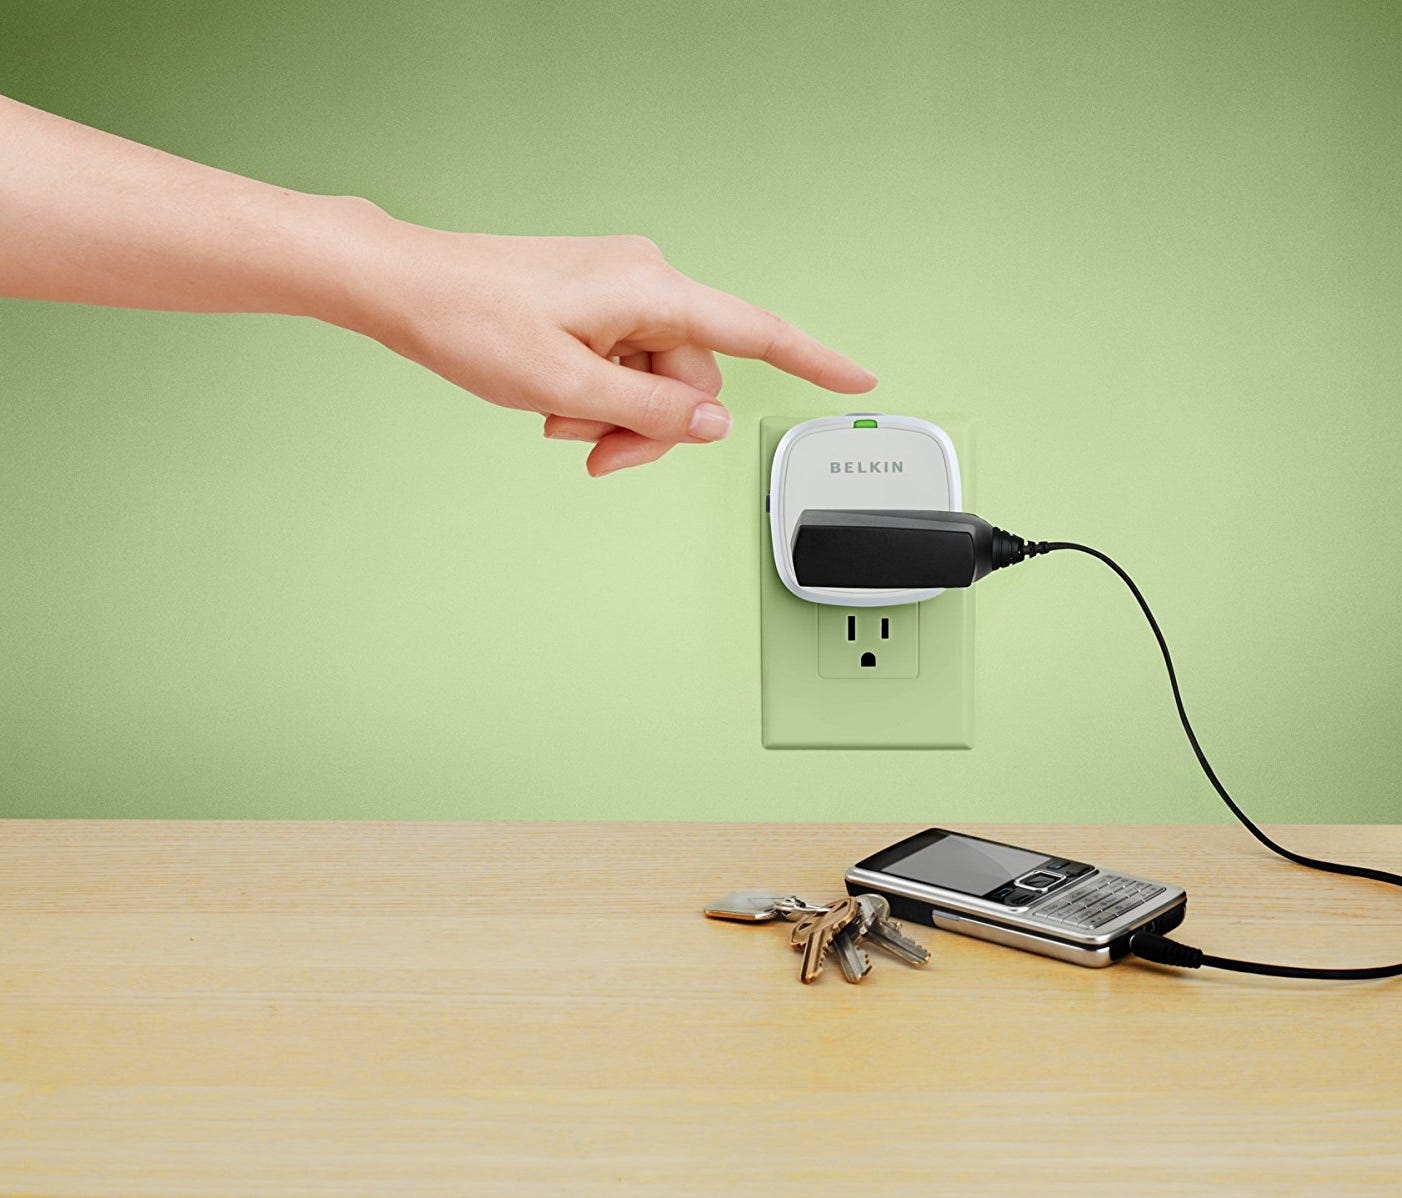 The Conserve line of products from Belkin help you cut off electricity to your gadgets when you don't need it.